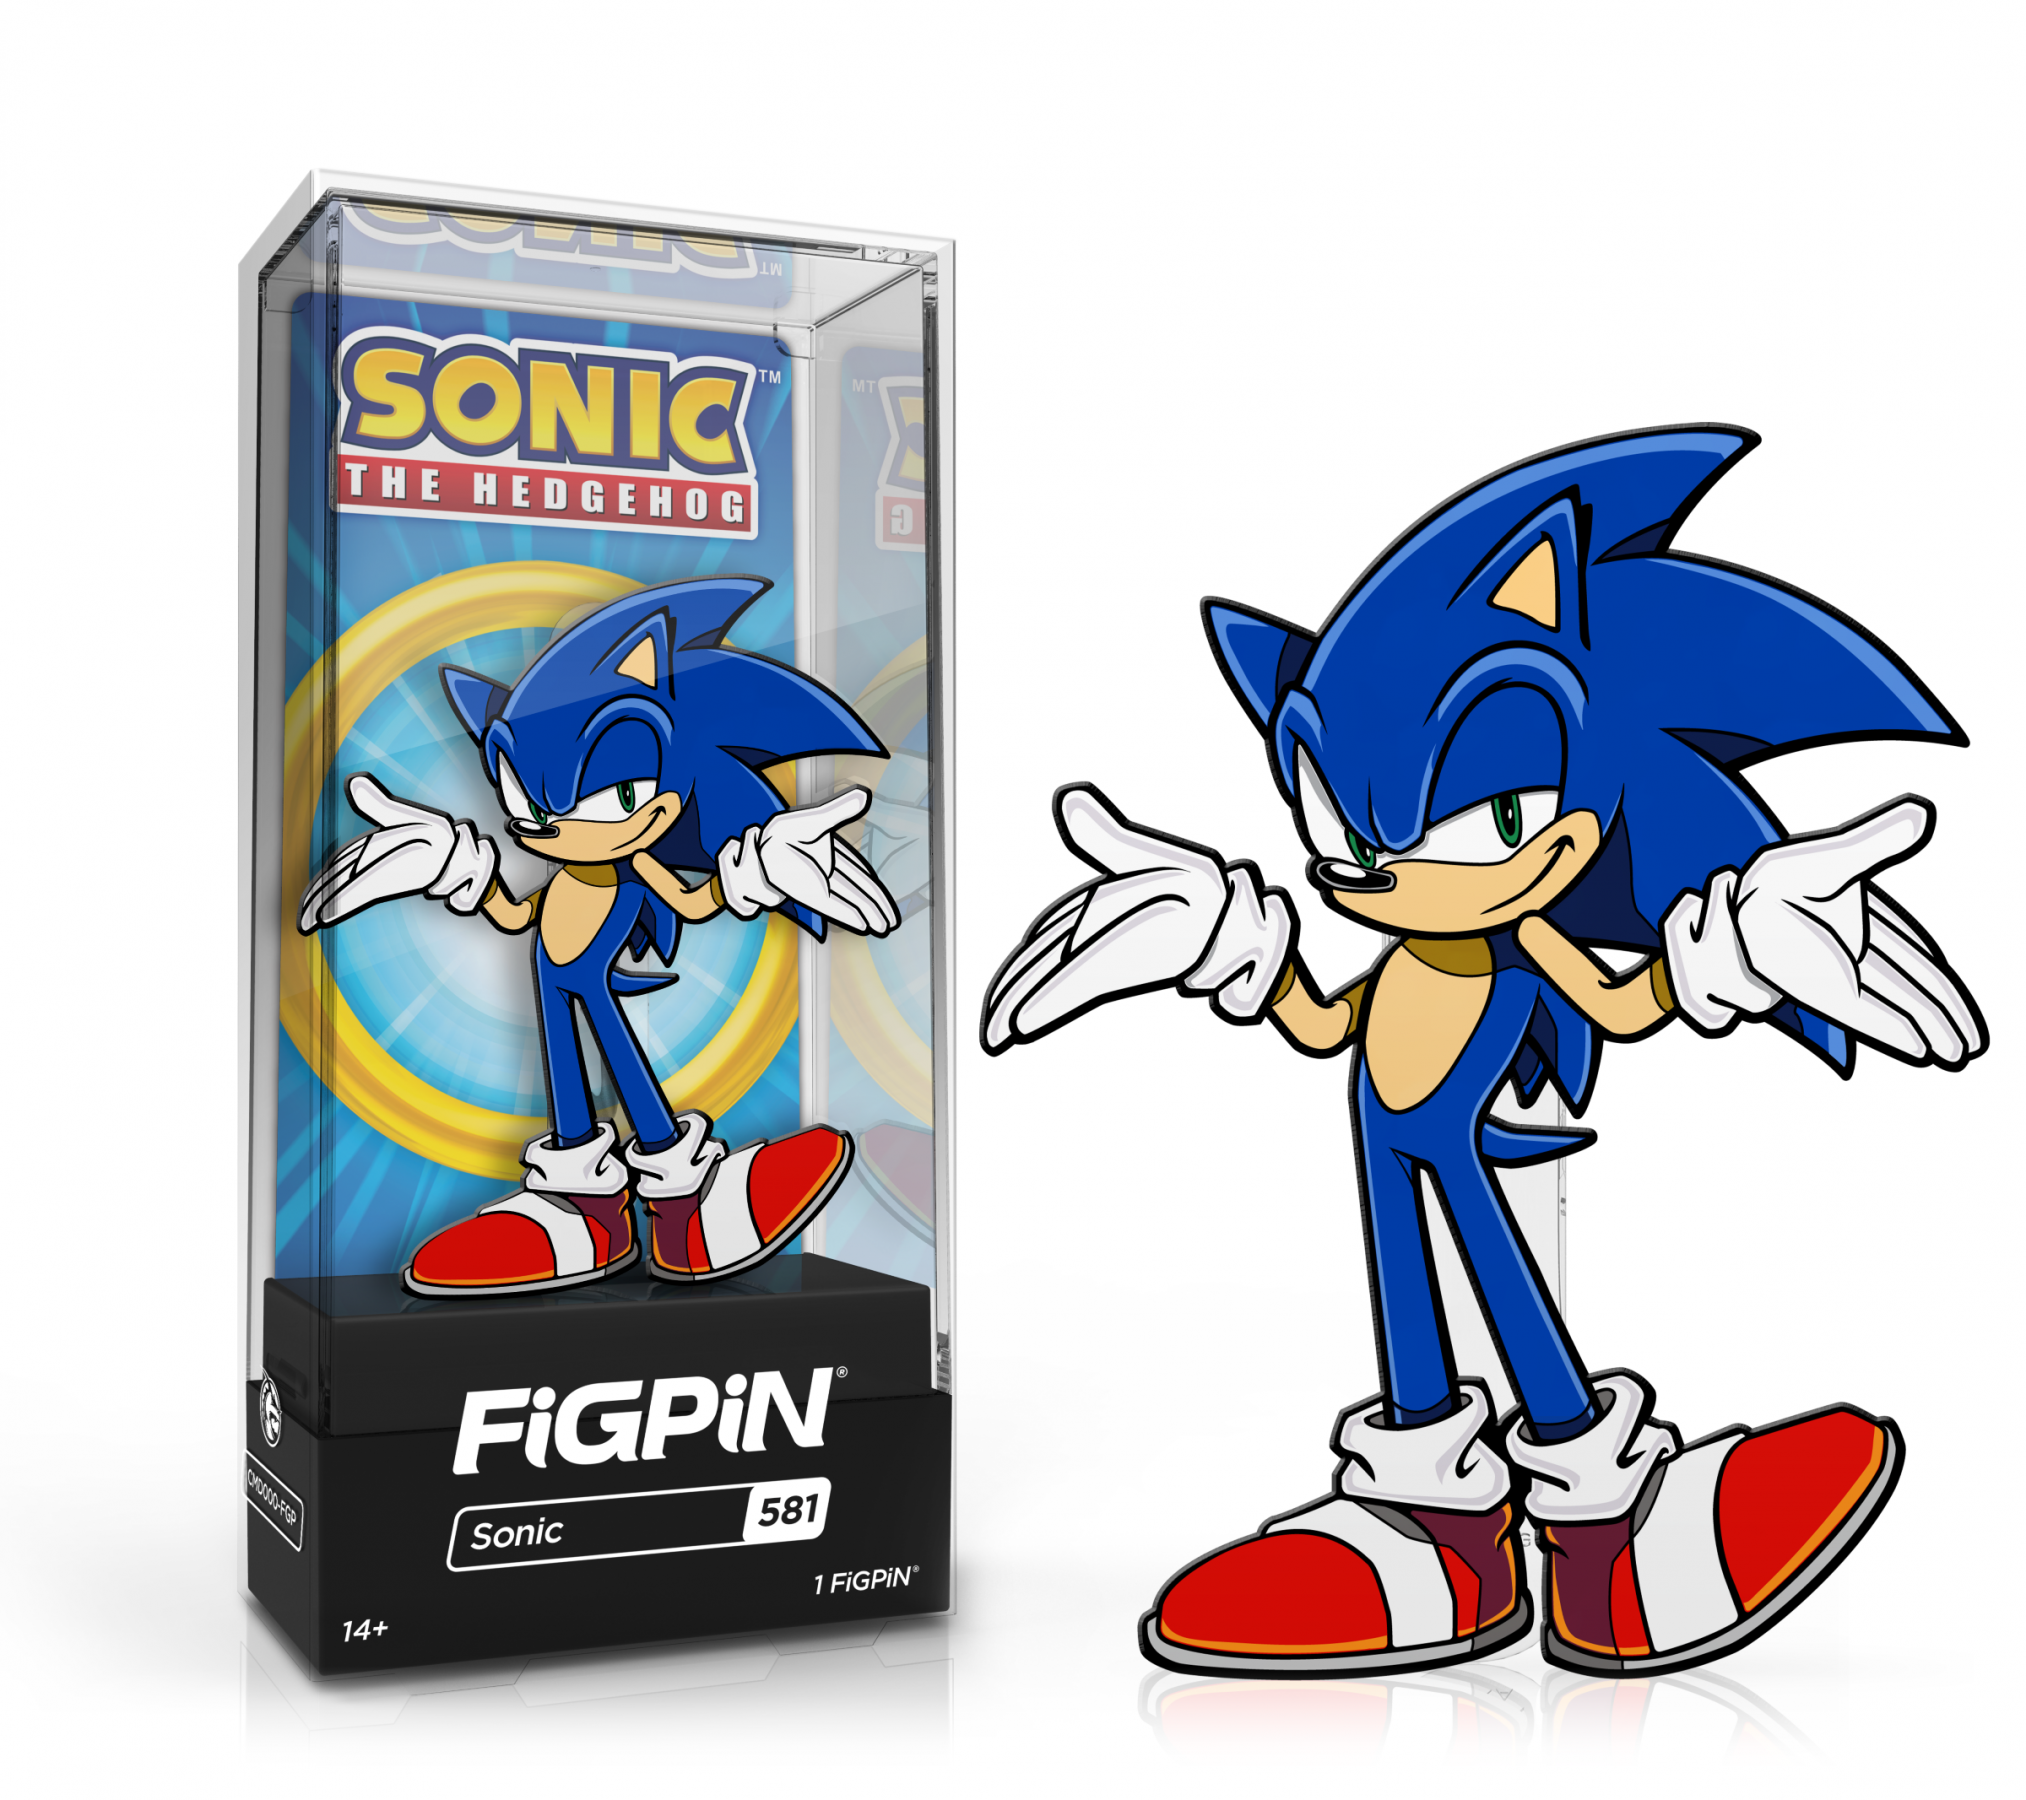 FiGPiN Sonic (581) Collectable Enamel Pin MKNJ6PTHF1 |27858|